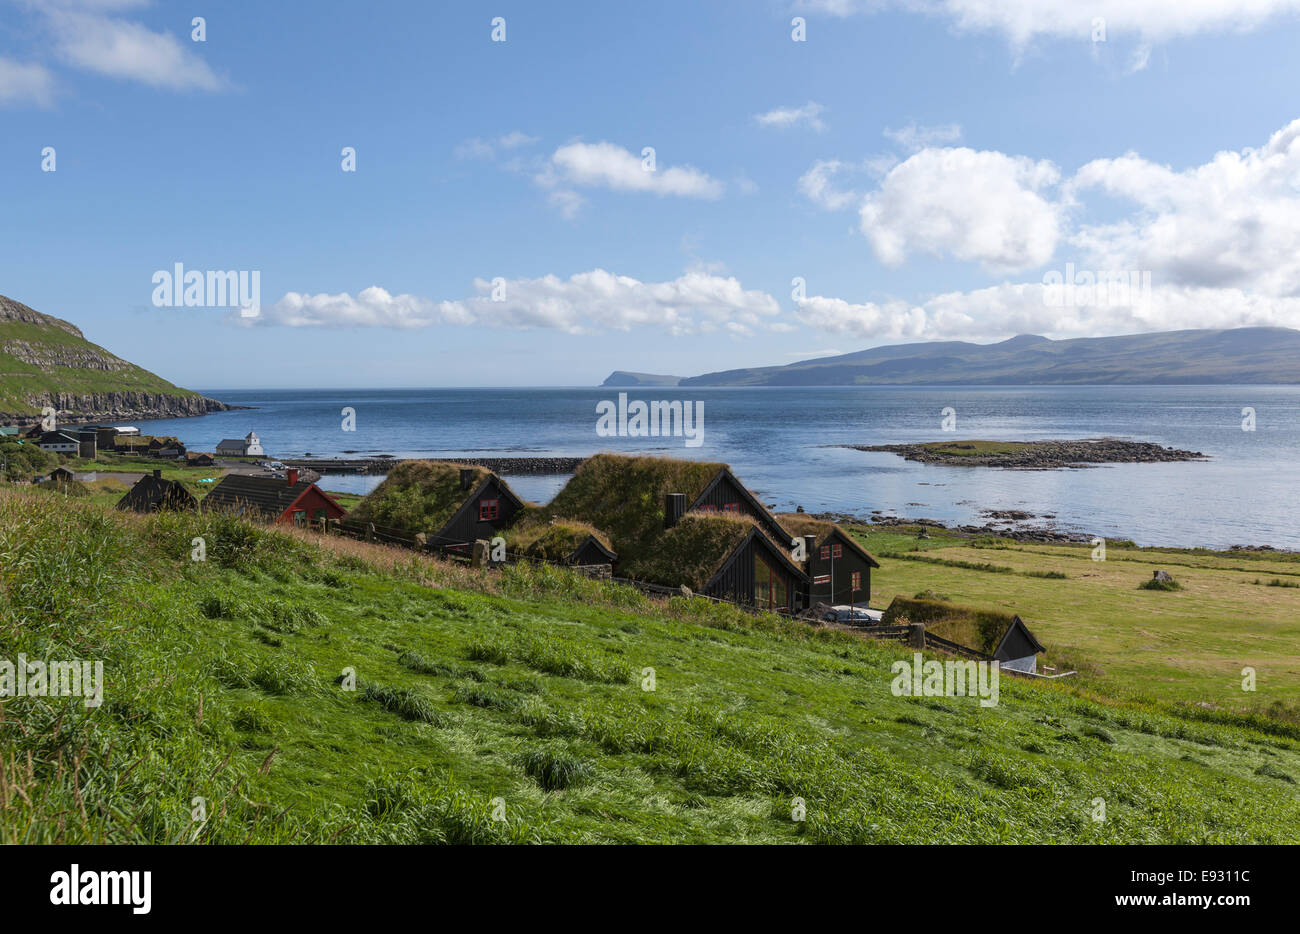 Colorful  and photogenic wooden houses with roof turf covered  in Kirkjubøur, Streymoy island, Faroe Islands, Stock Photo